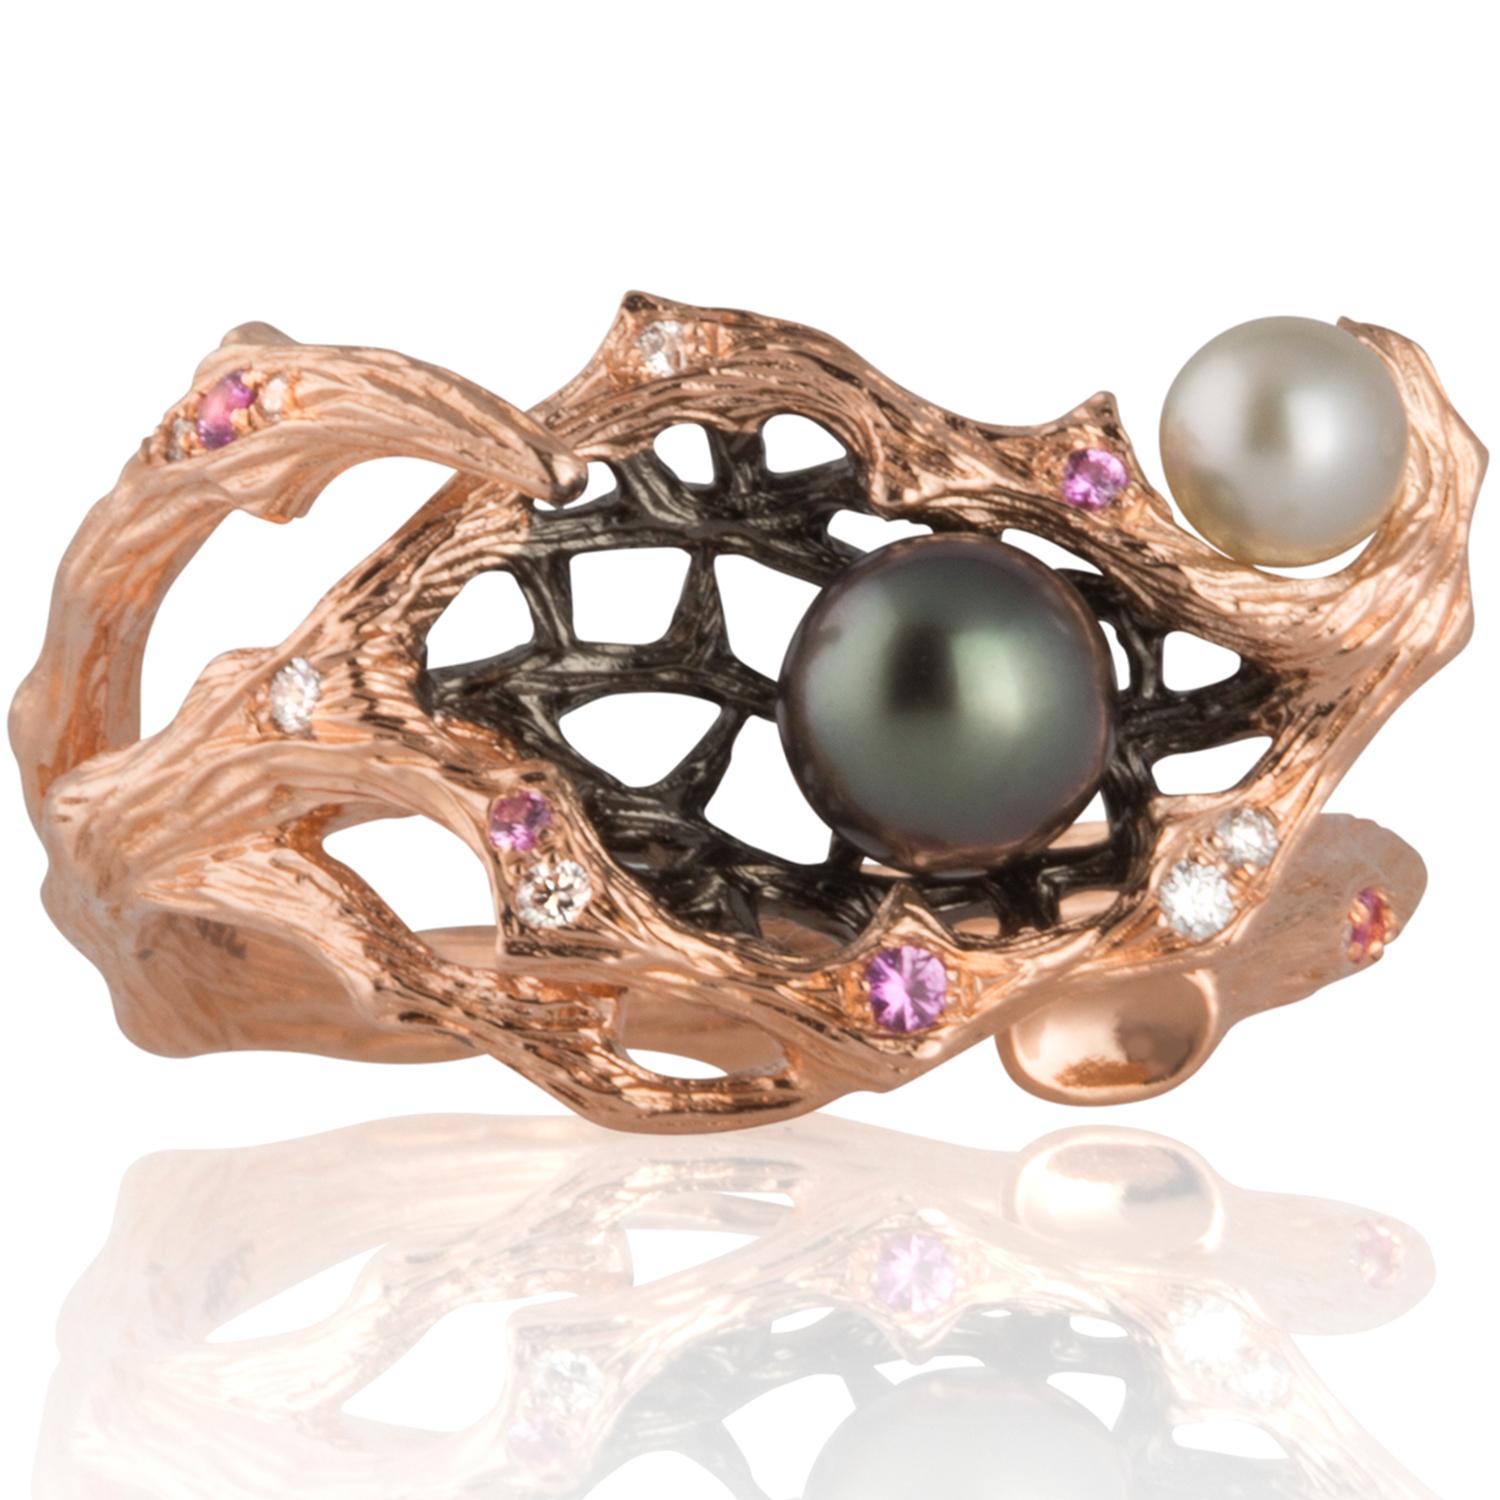 Capturing the creative magic of metamorphosis, this 18K rose gold ring is inspired by the fruits of nature. Polished and decadent rare south sea keshi pearls are surrounded by petite pink sapphires and fine diamonds in a bold design that